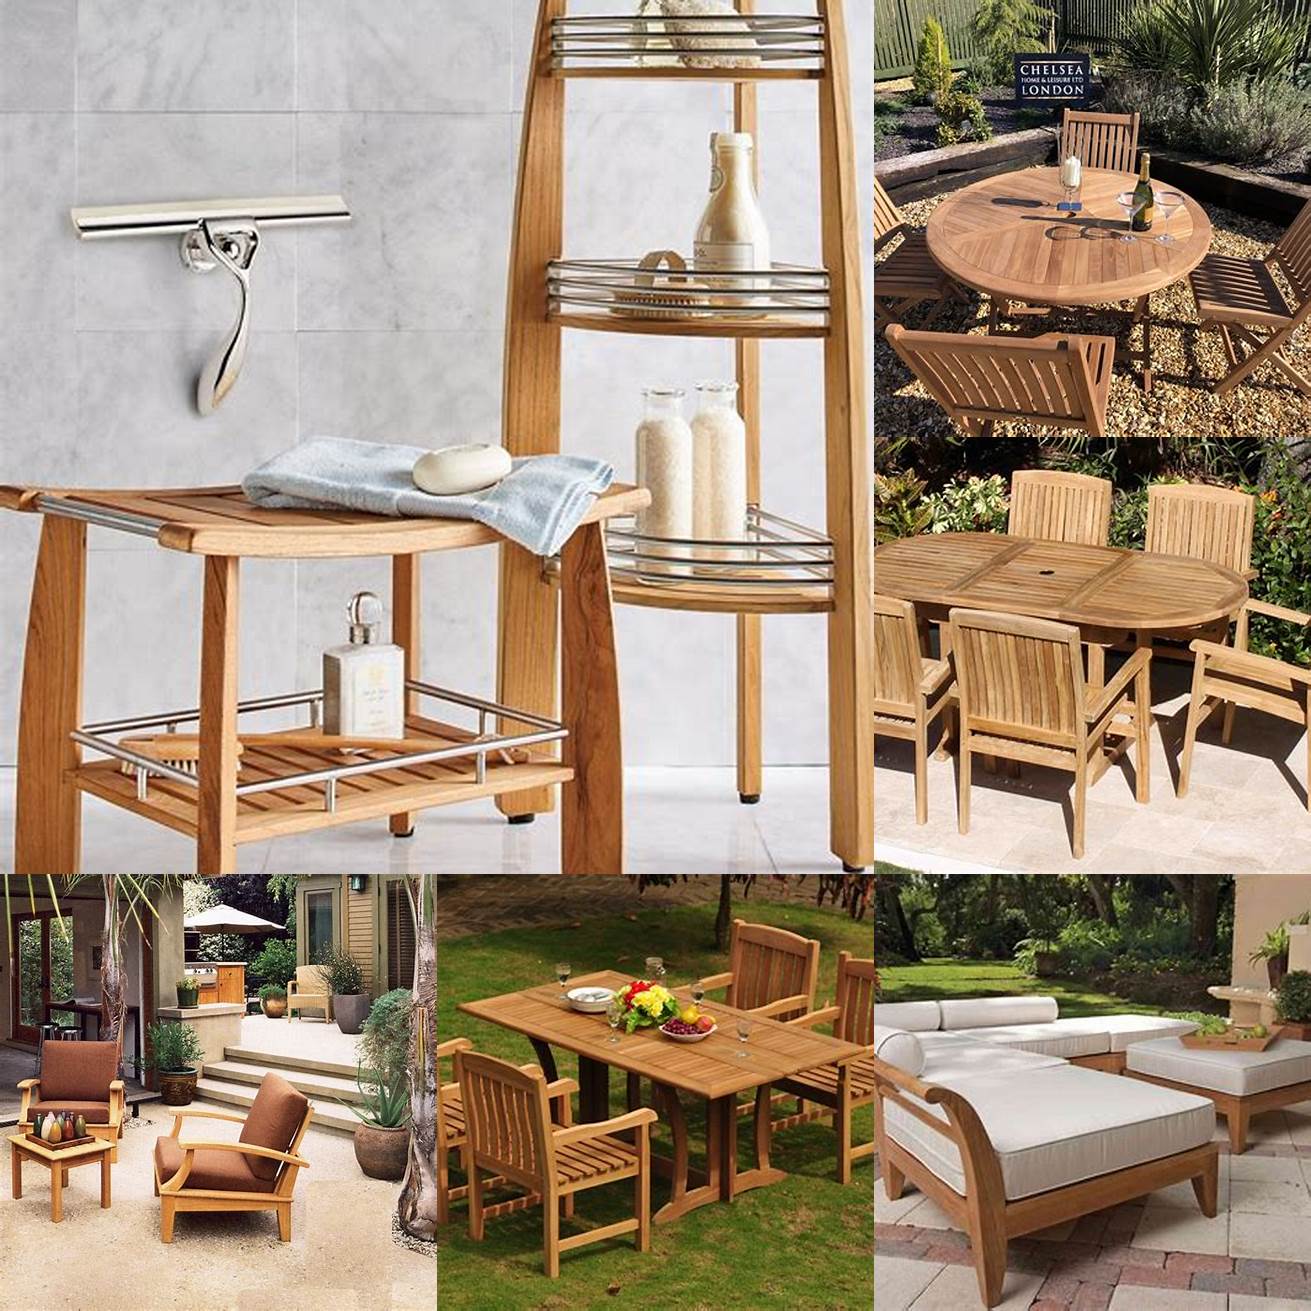 A Photo of Teak Furniture and Accessories